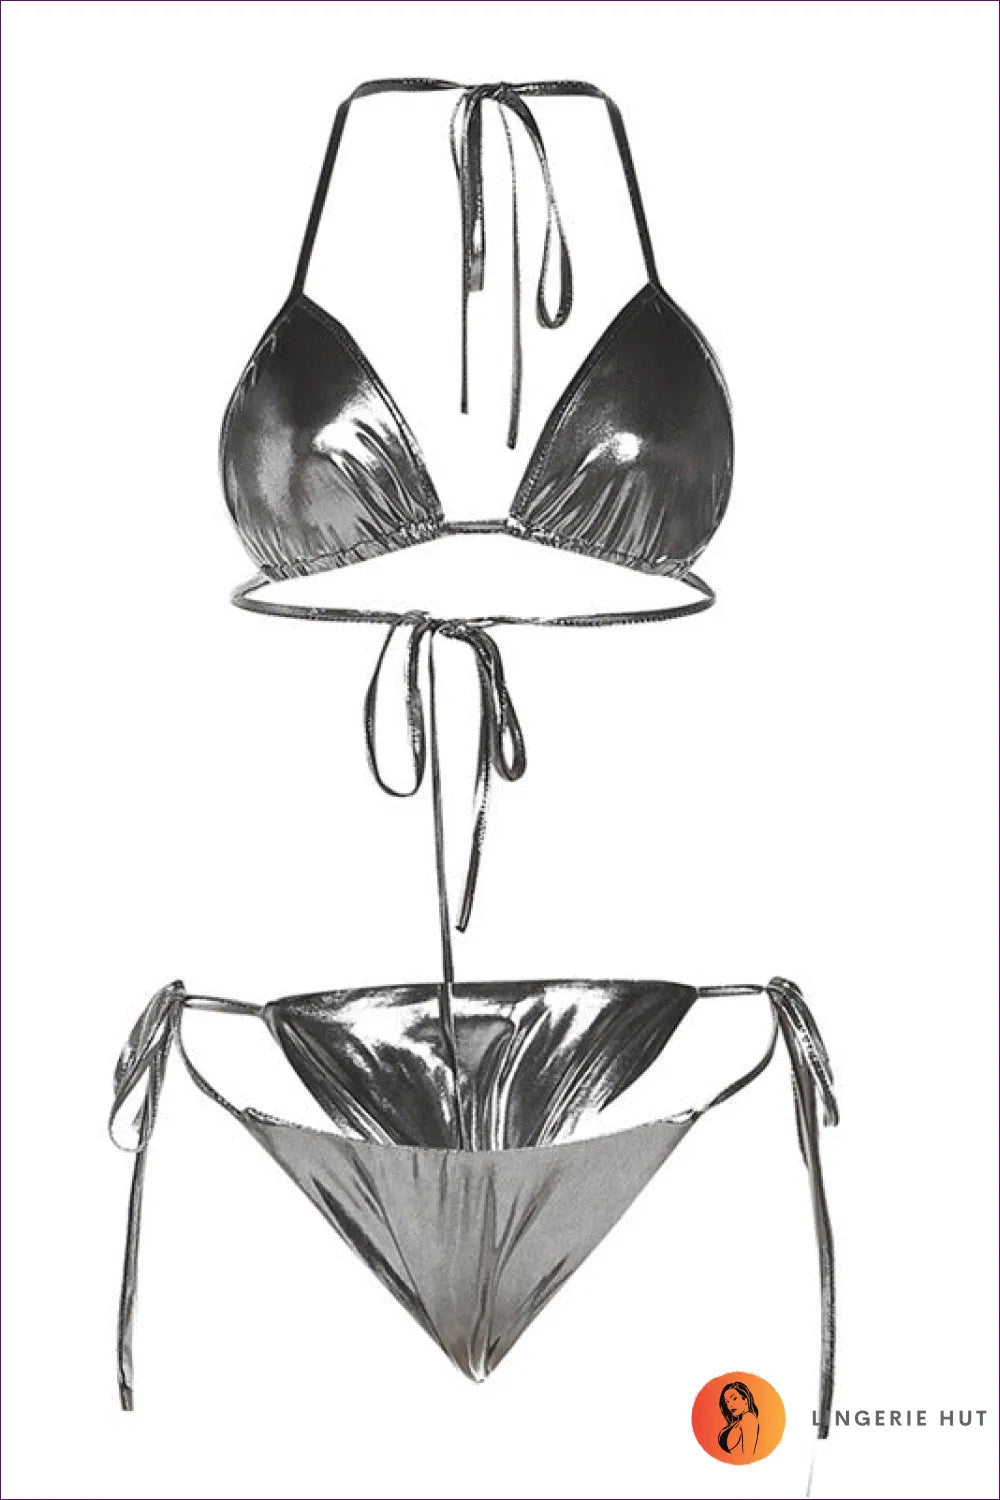 Embrace The Shine With Our Boho Metallic Reflective Bikini - a Sexy Backless Halter Lace-up Set That Sparkles